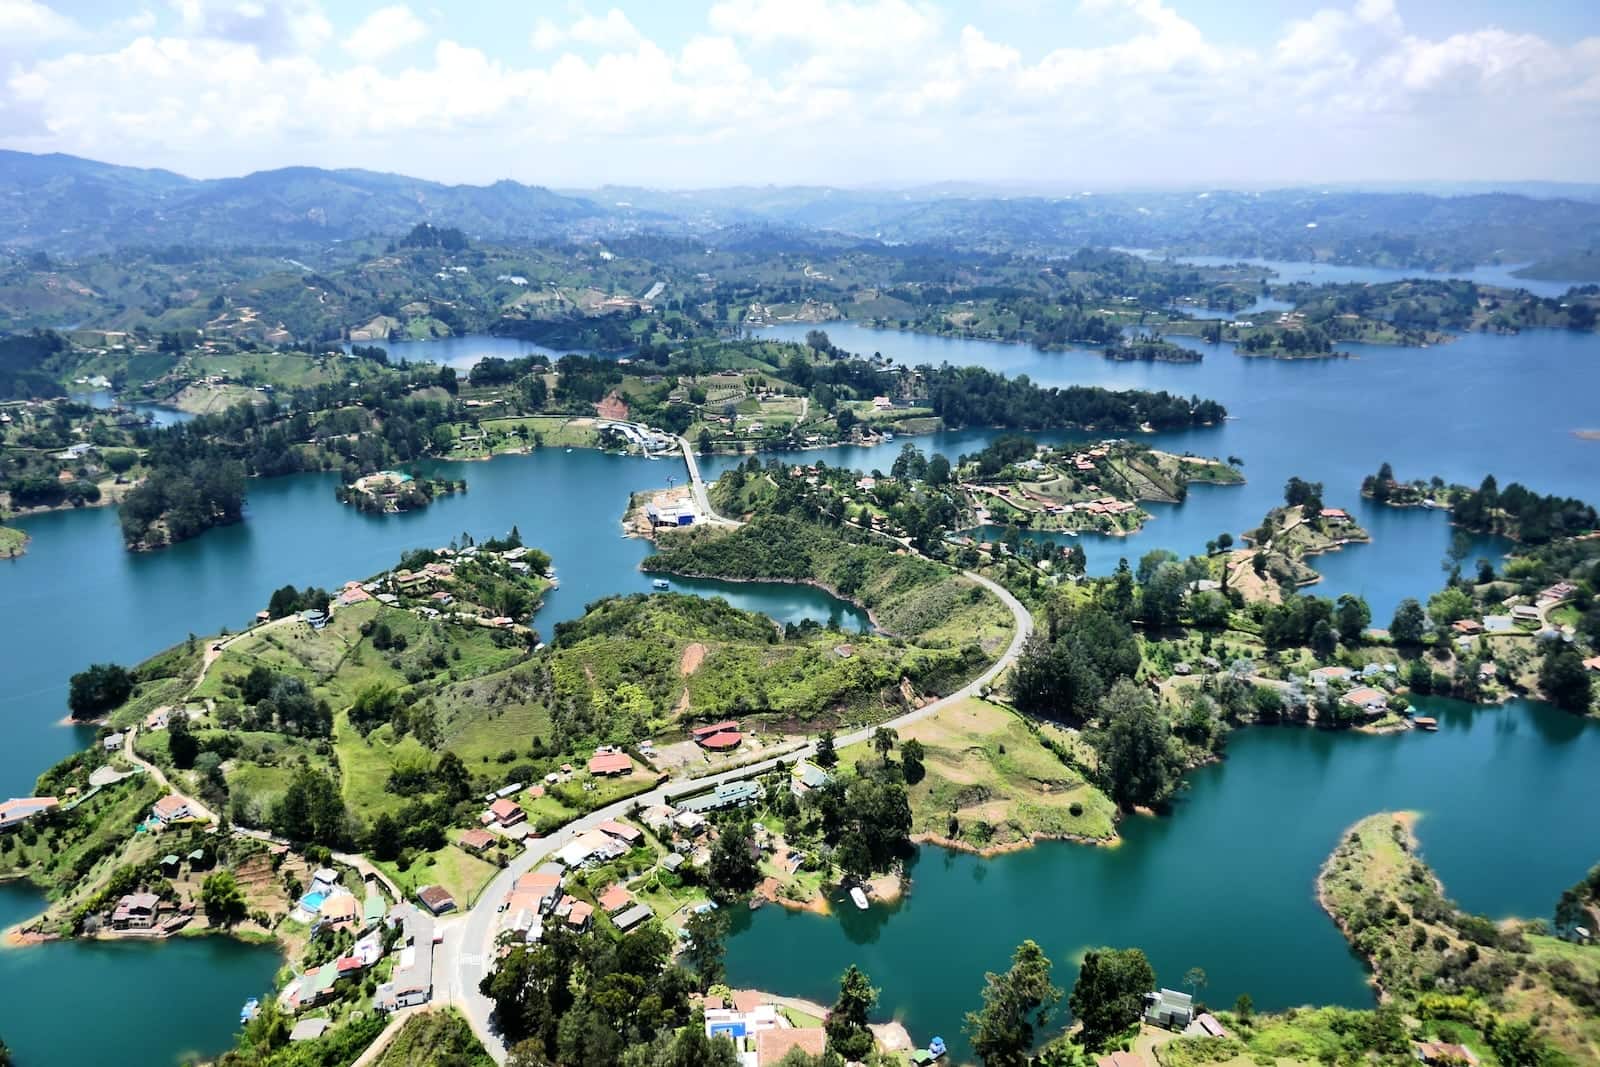 The view across Guatape from the top of Piedra del Penol.